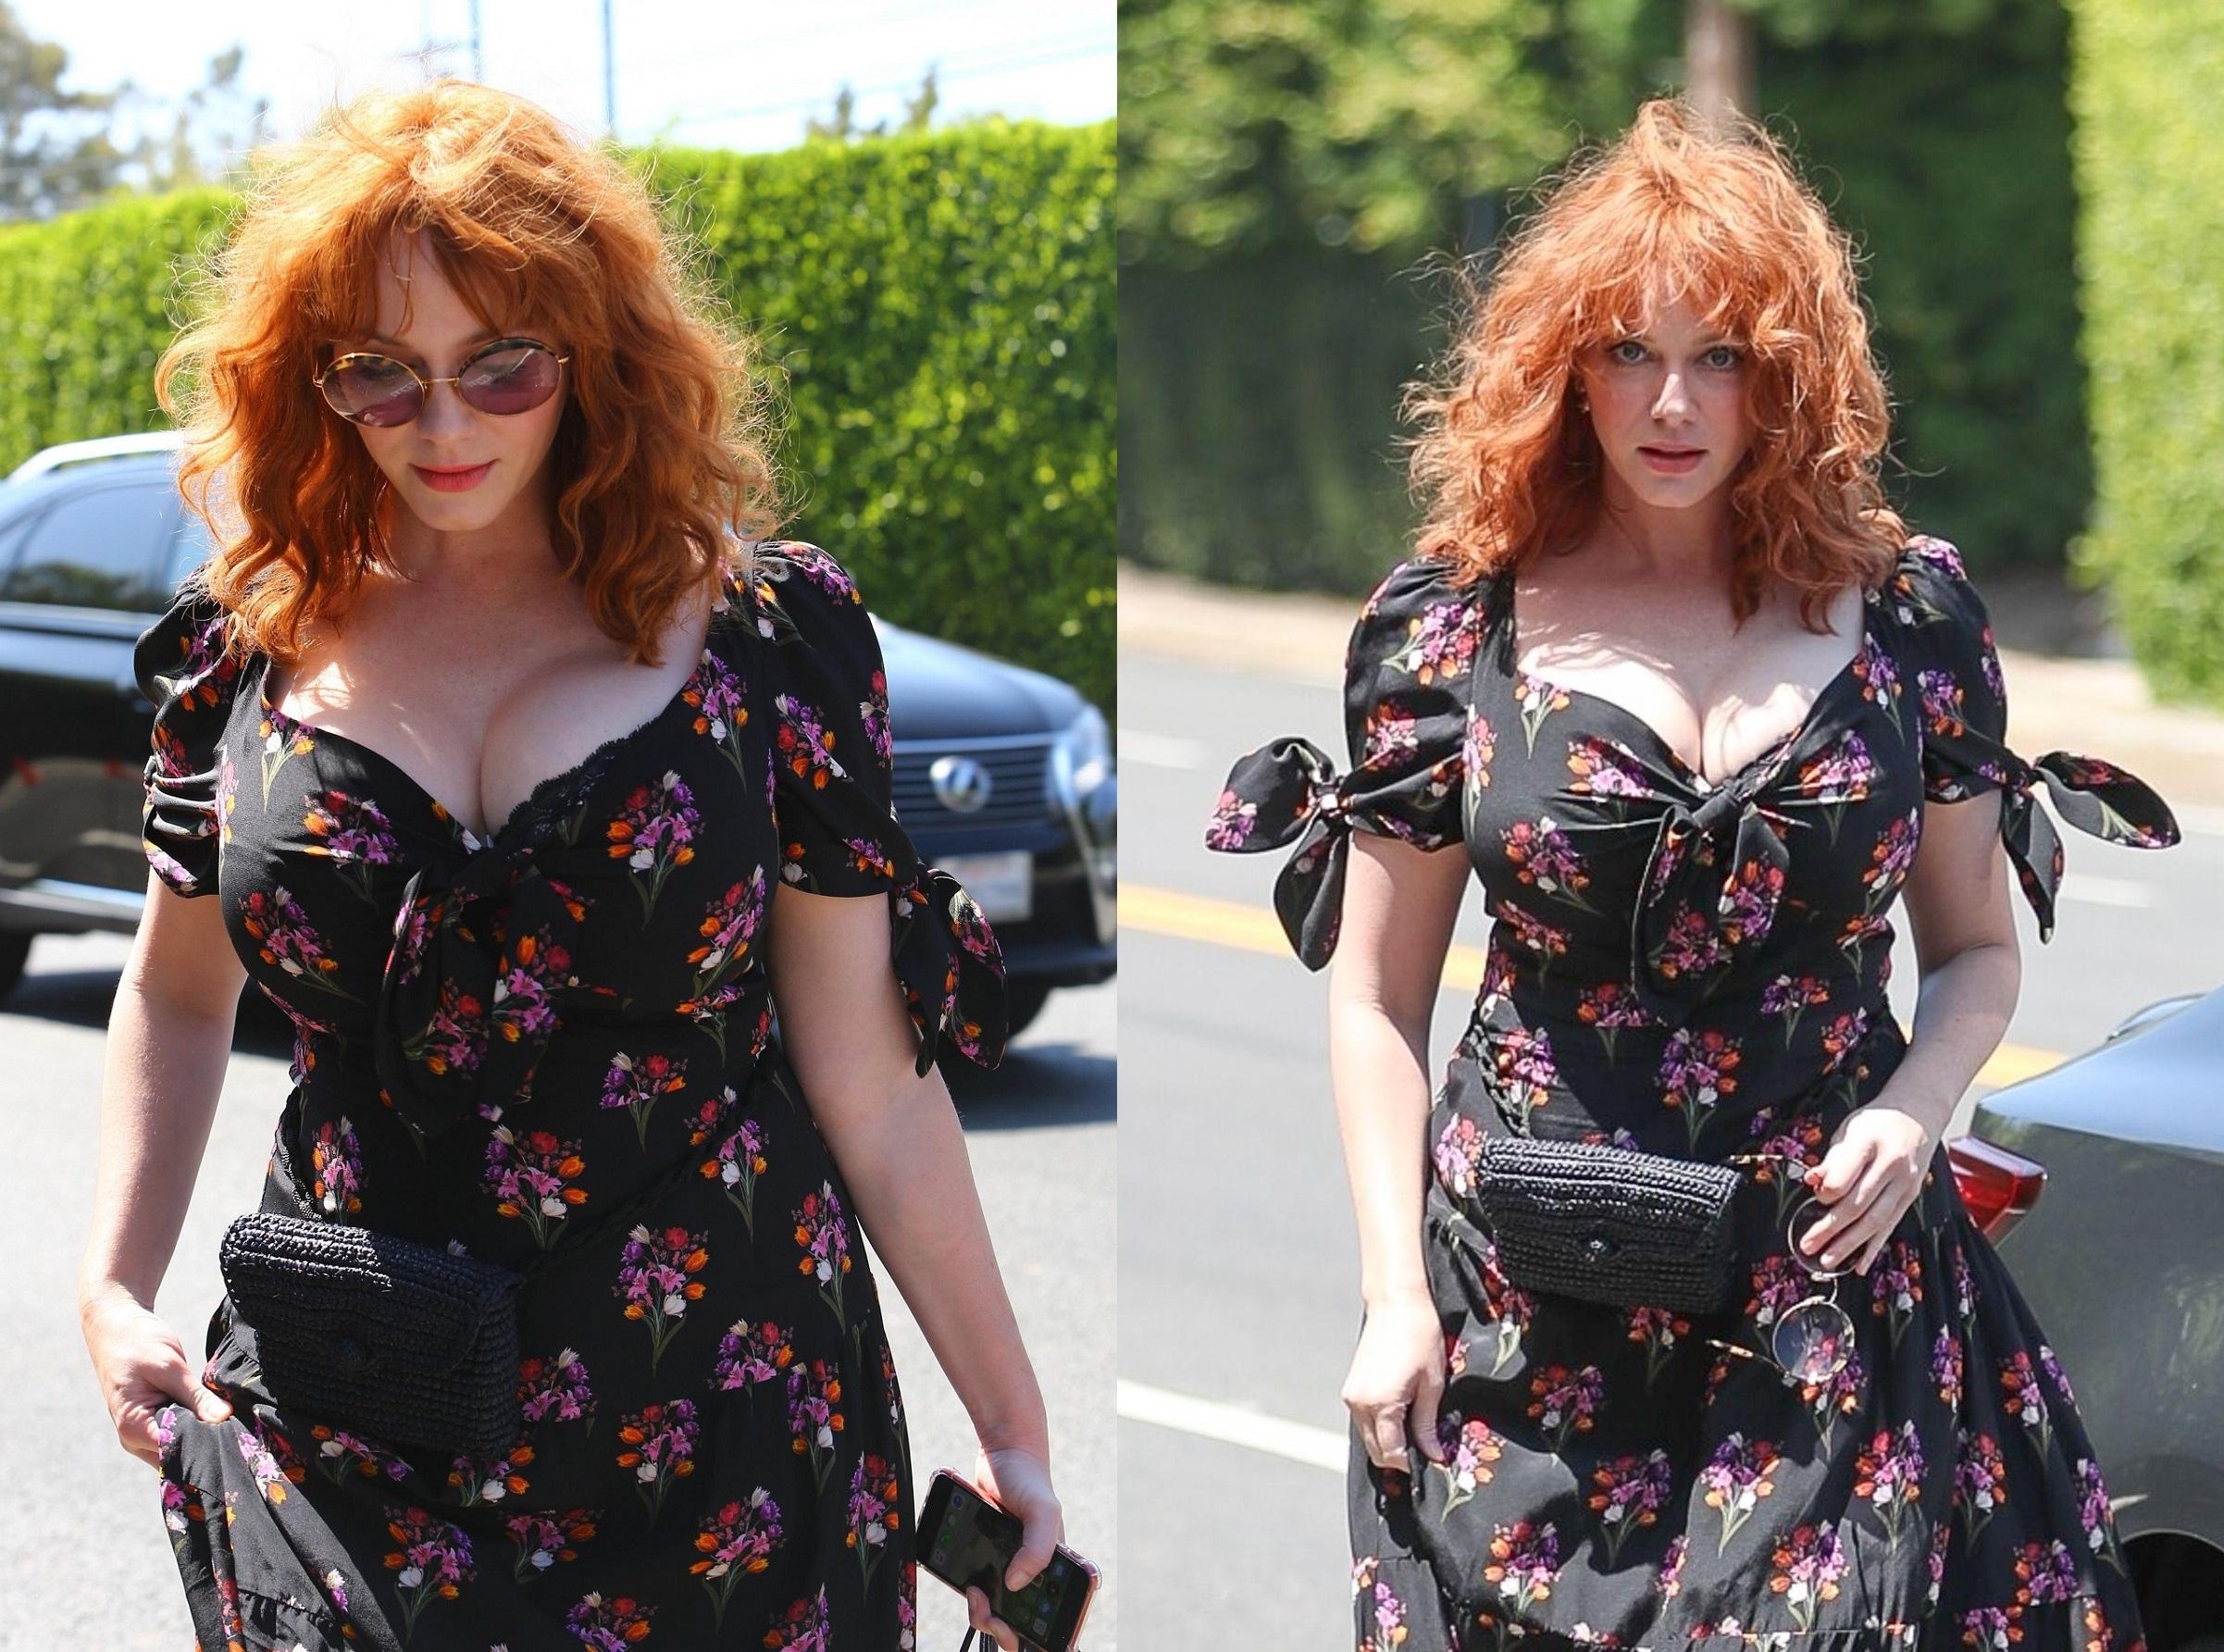 I wonder how Christina Hendricks would feel if she knew that I jerk off to her every single day?